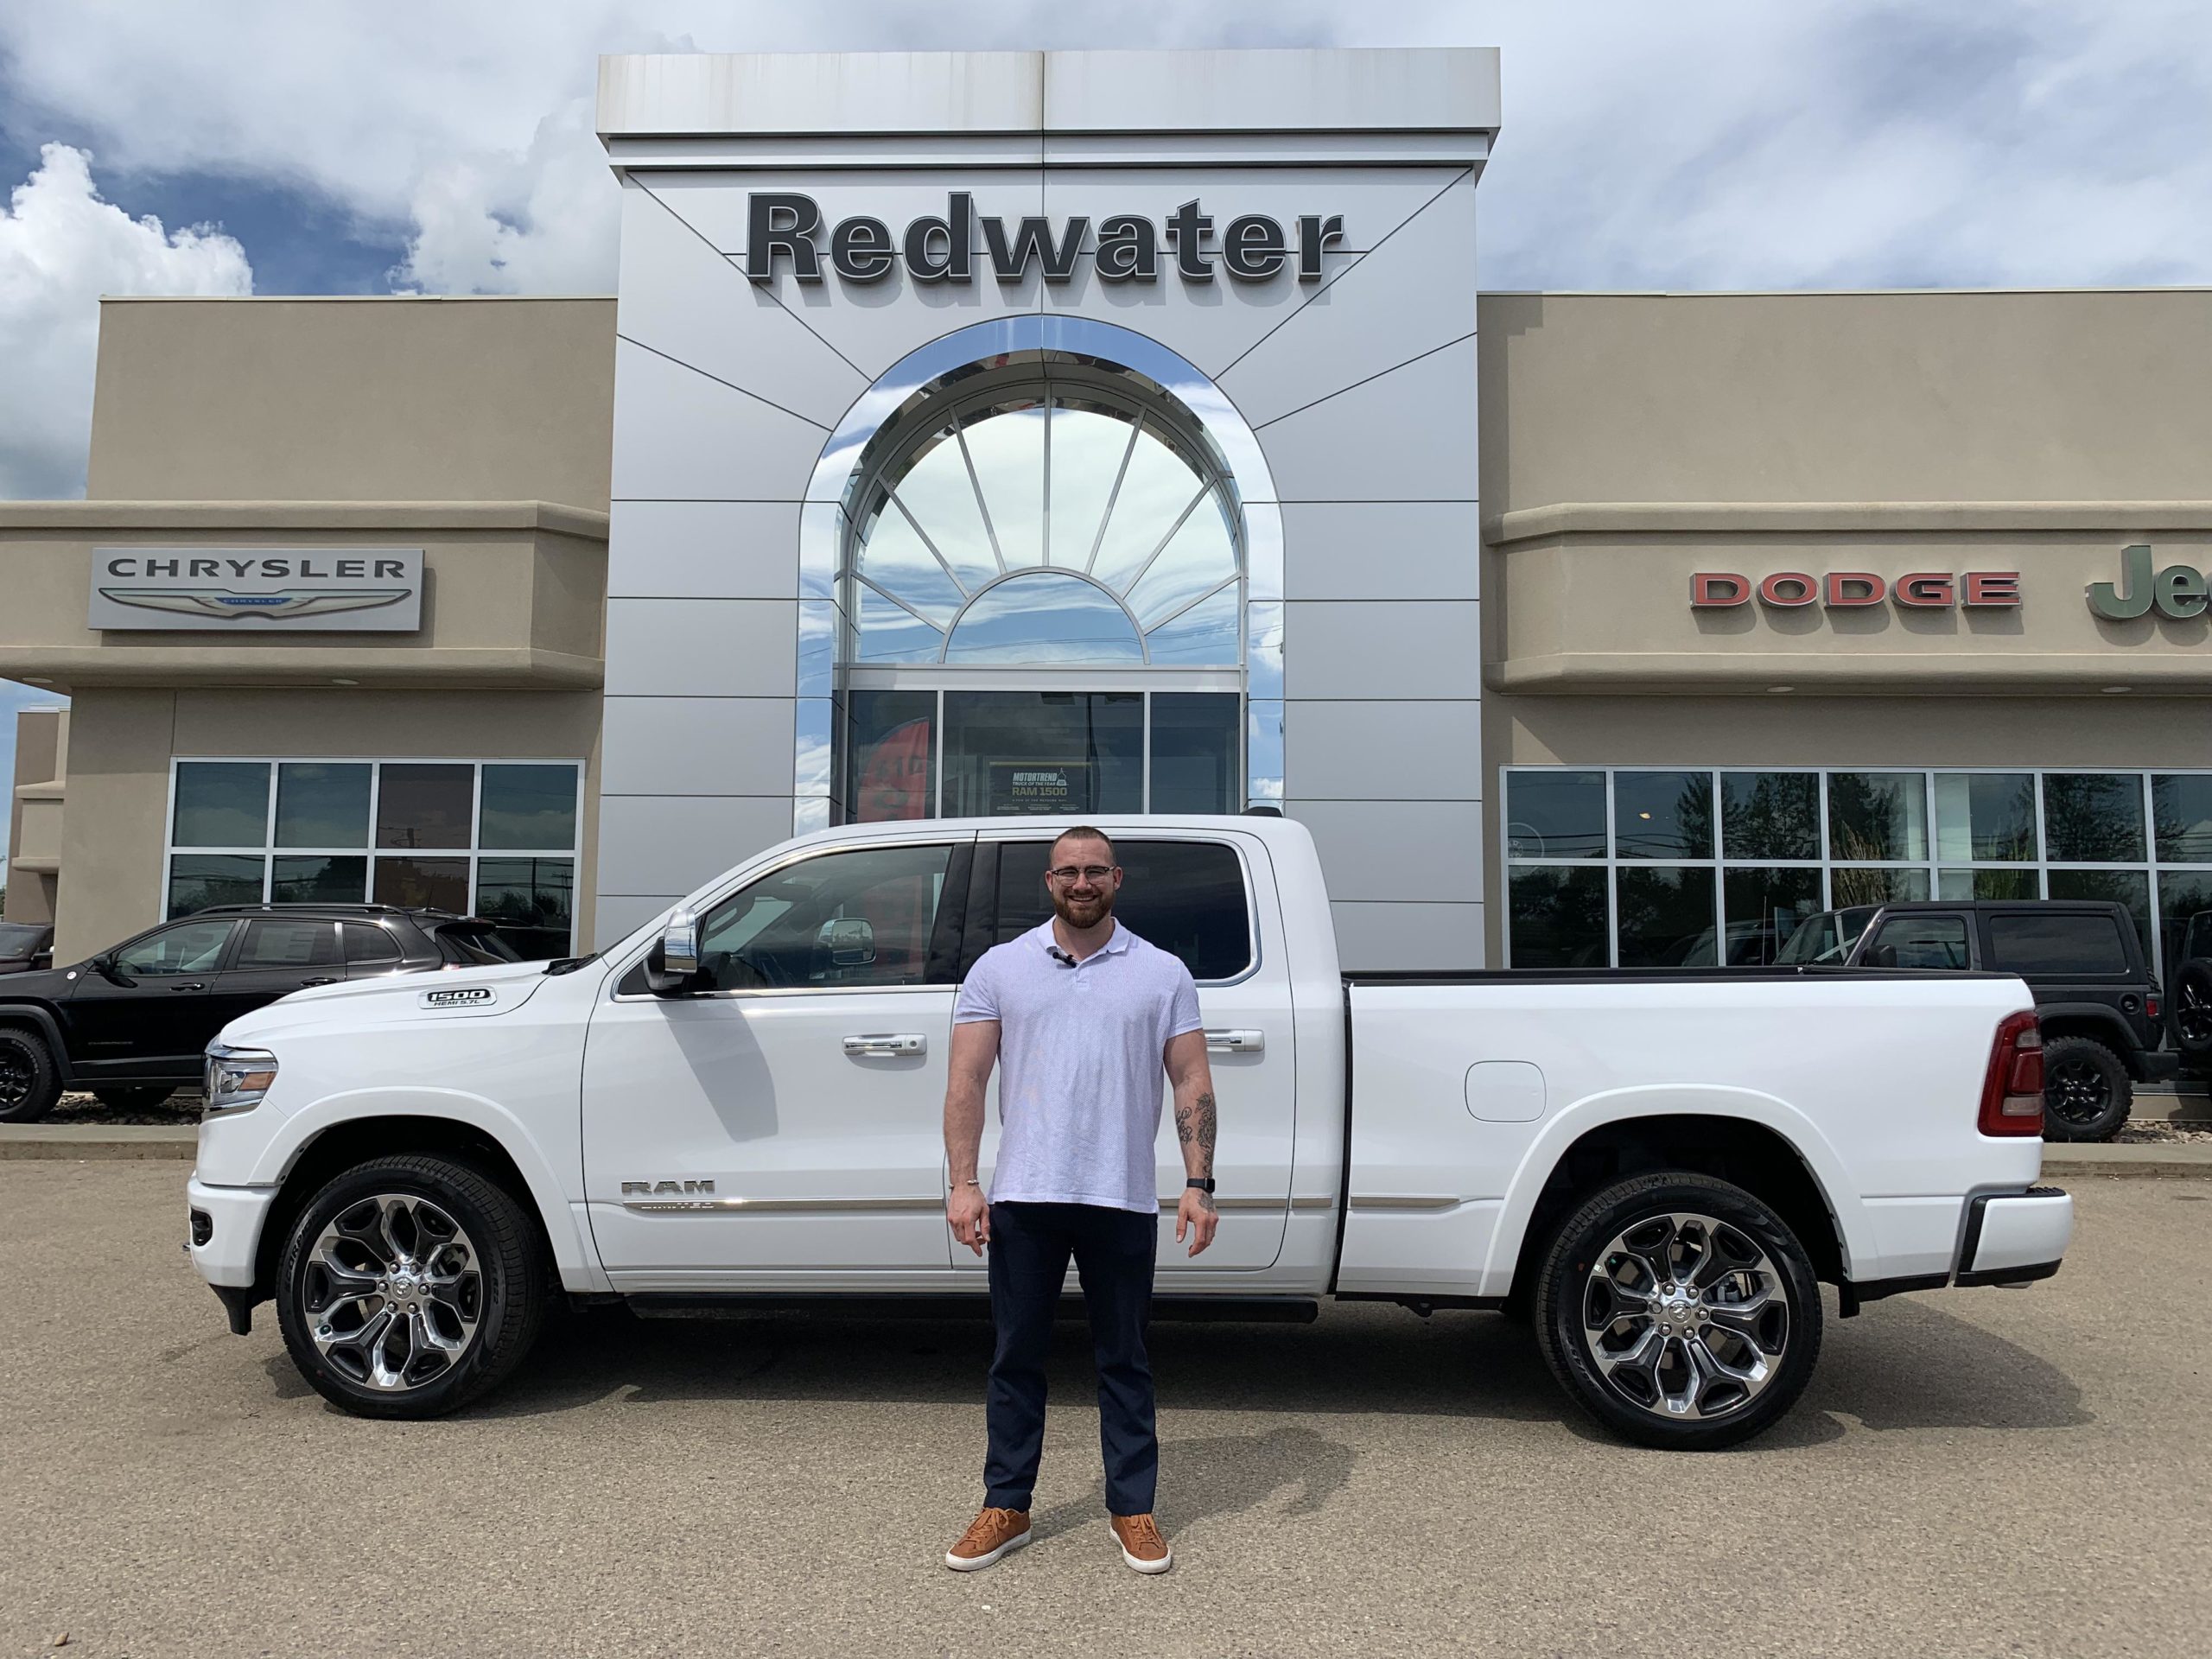 NR11734 2022 Ram 1500 Limited Crew Cab 4x4 Redwater Dodge